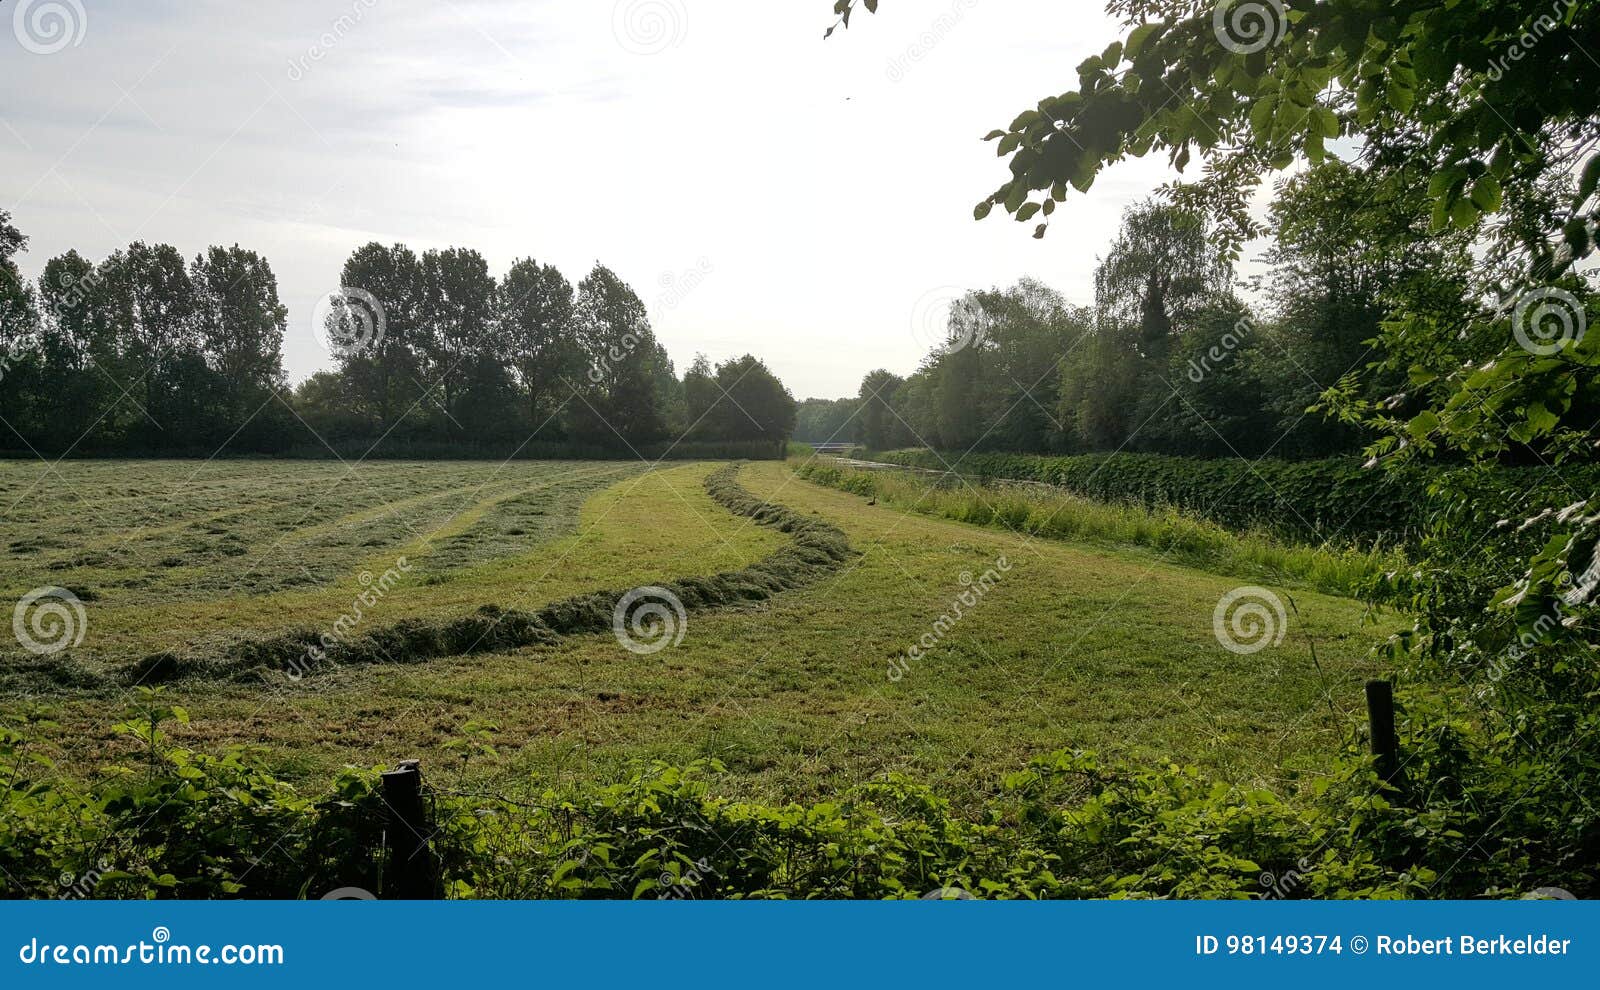 Grass Field Nearby A Creek Stock Photo Image Of Hanging 98149374